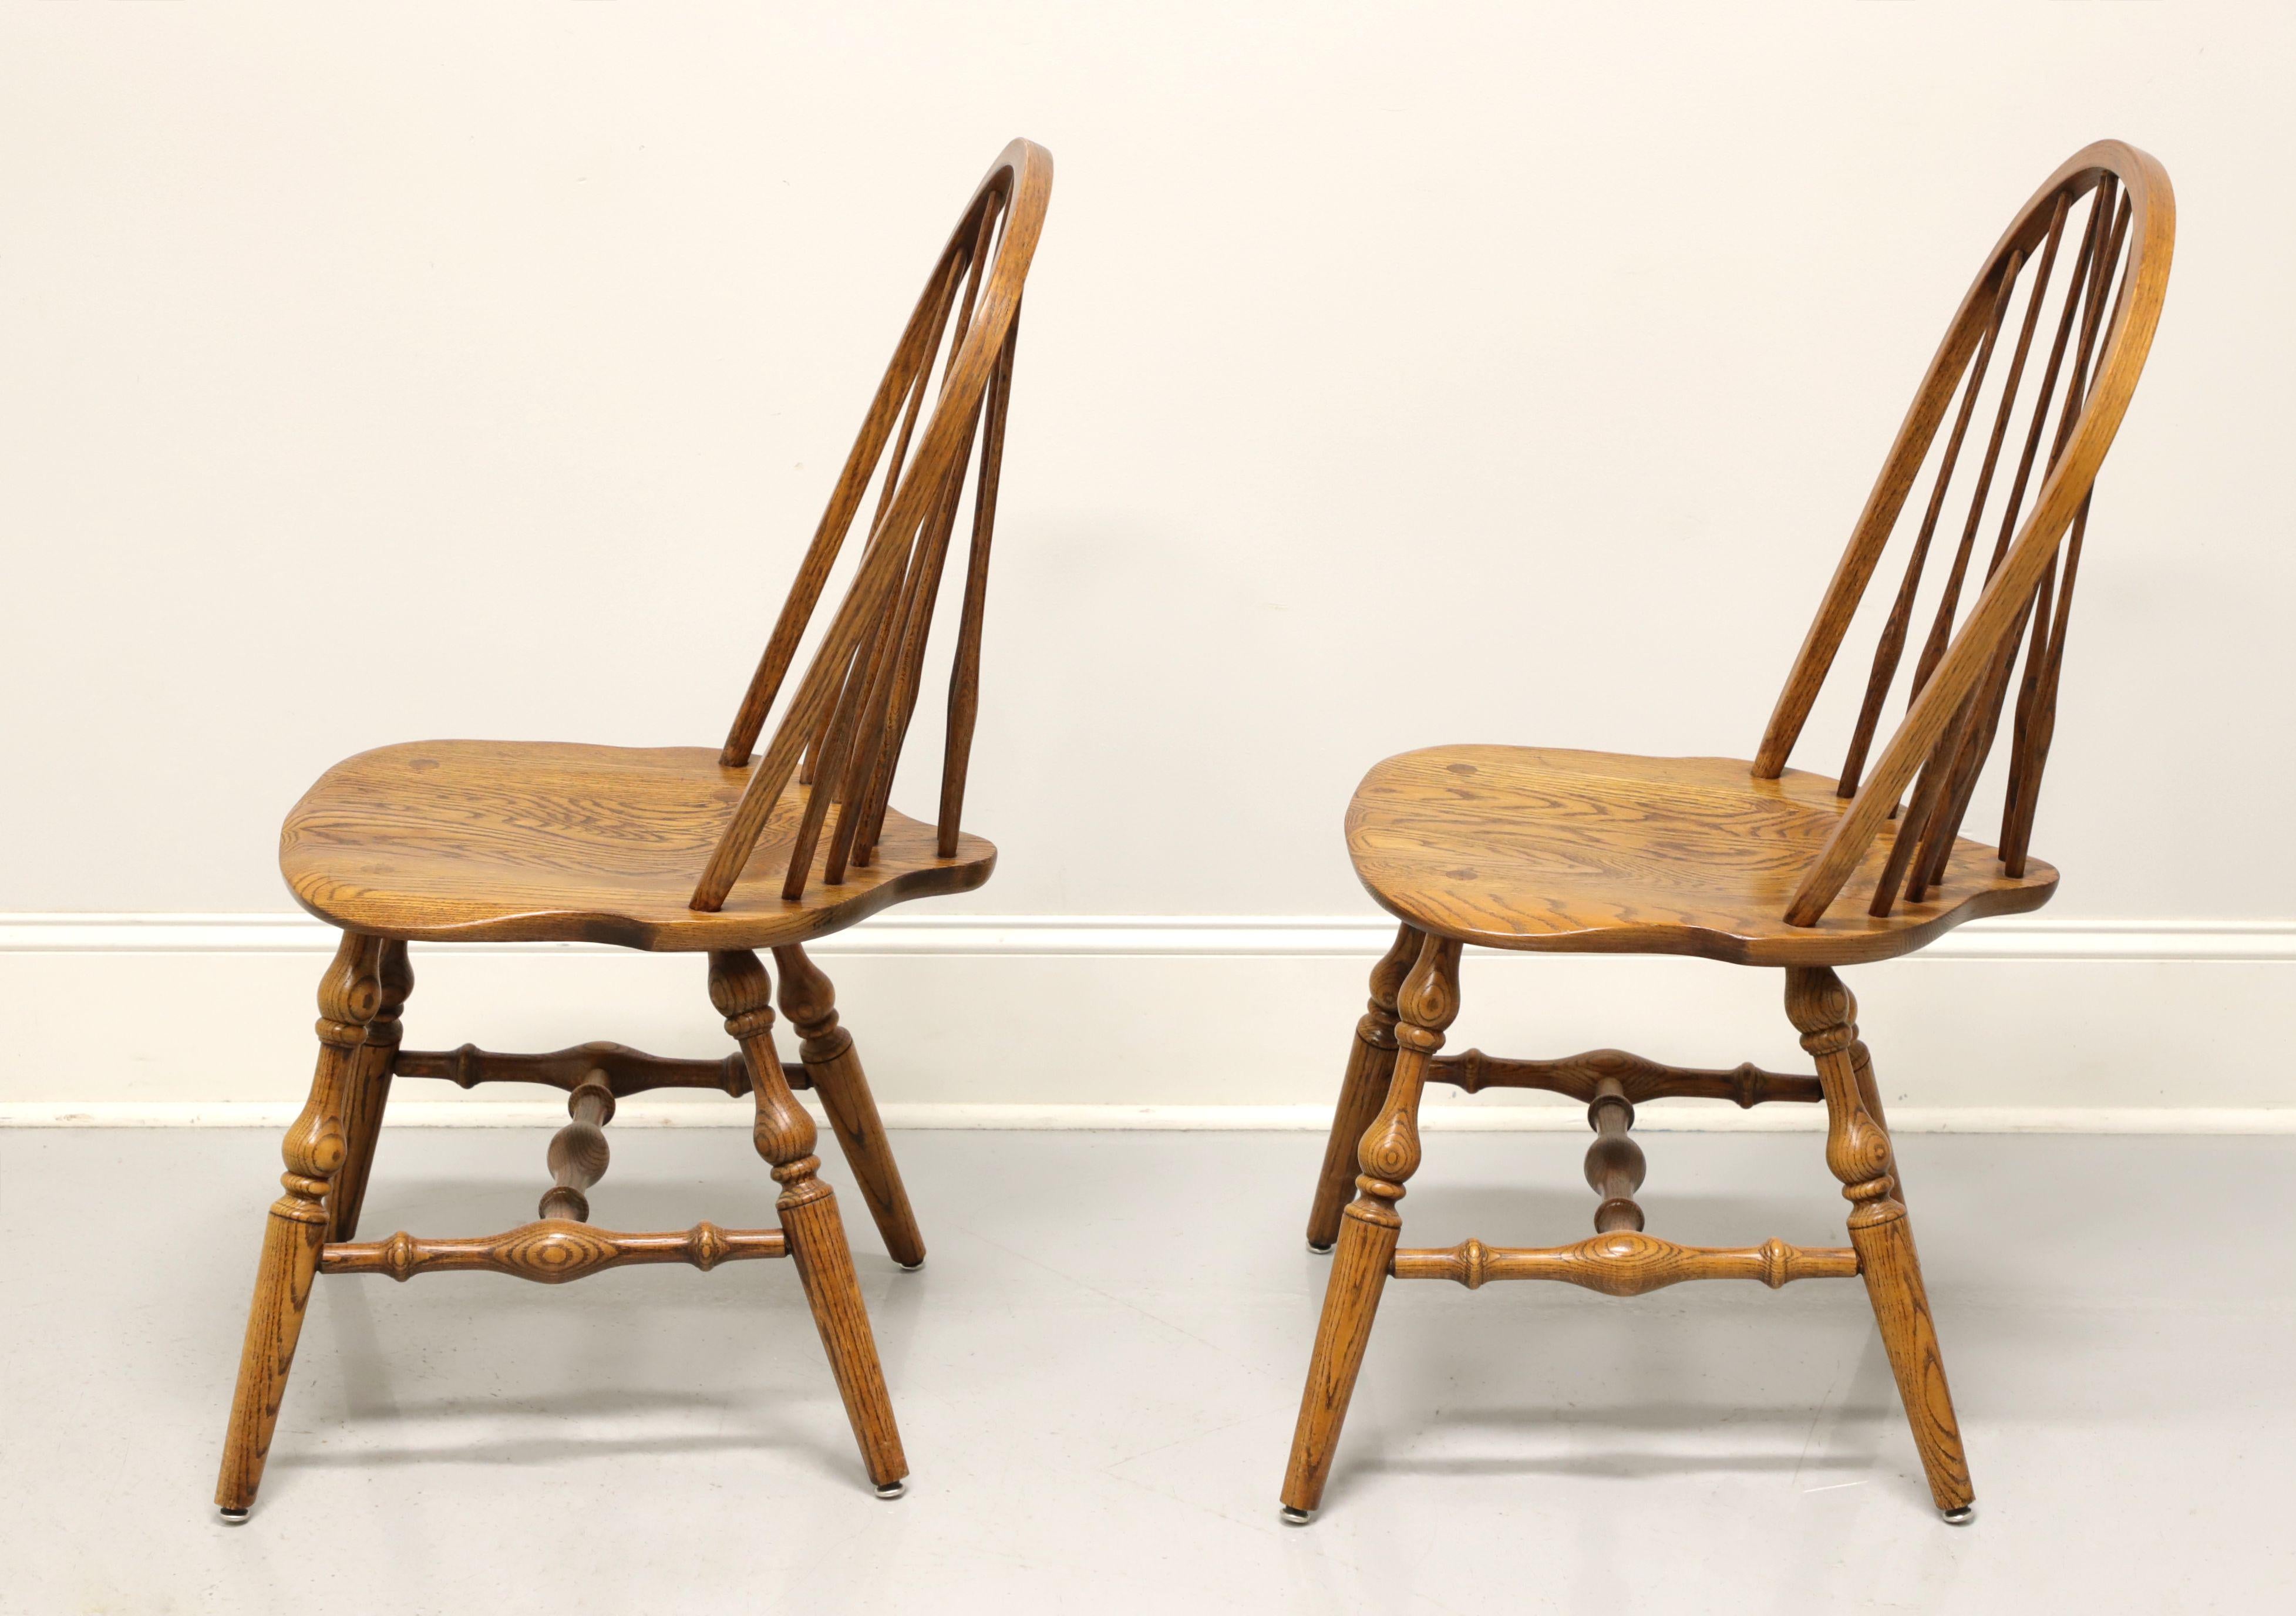 HALE Mid 20th Century Solid Oak Windsor Dining Side Chairs - Pair A 1